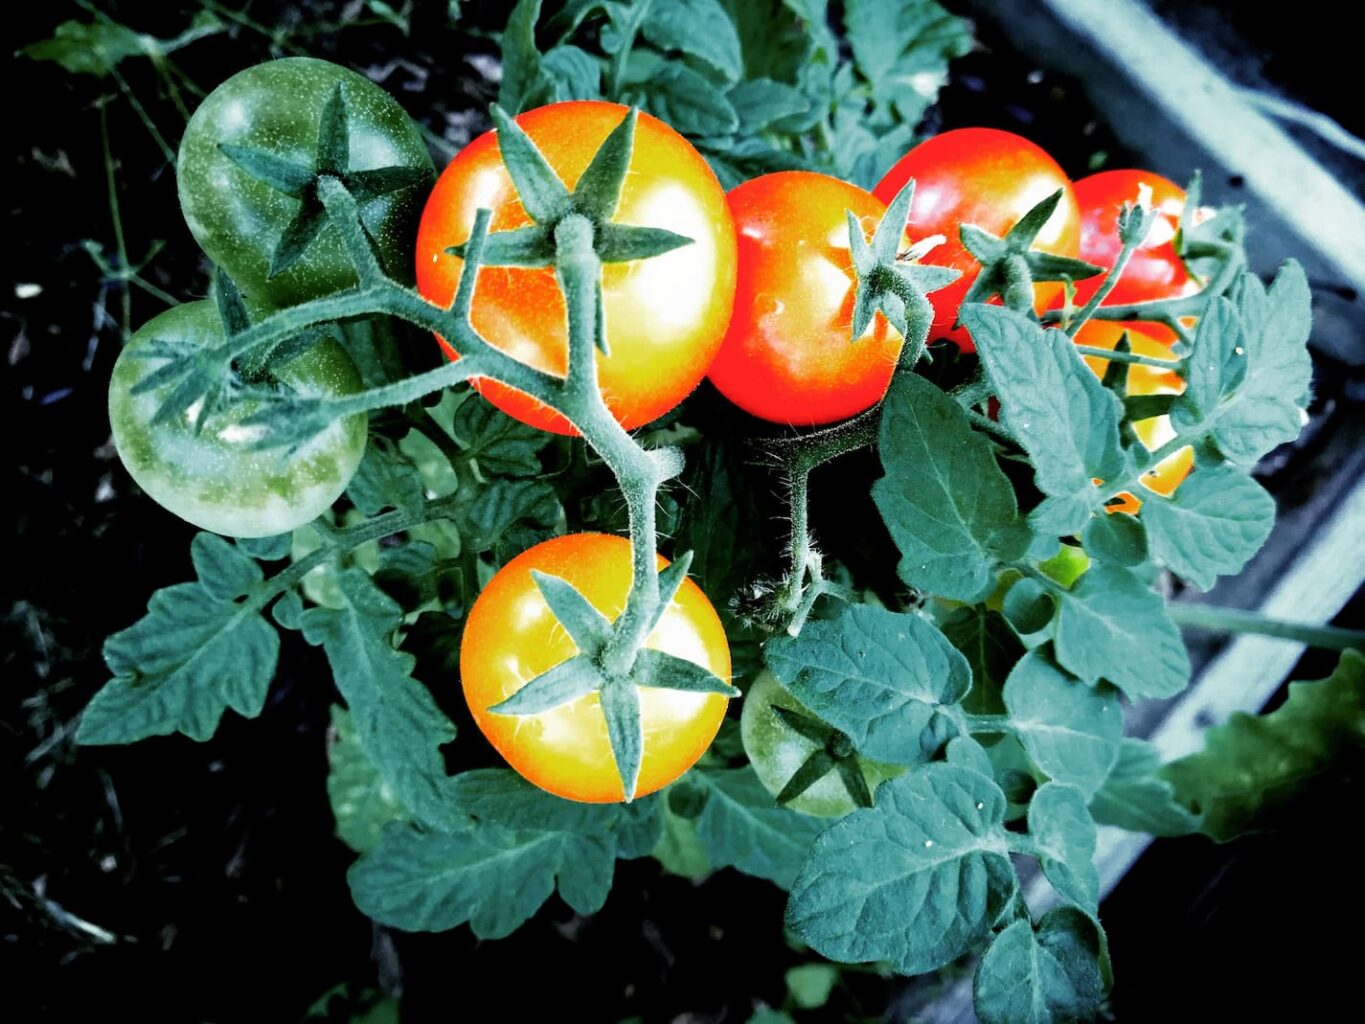 an image of a tomato plant growing